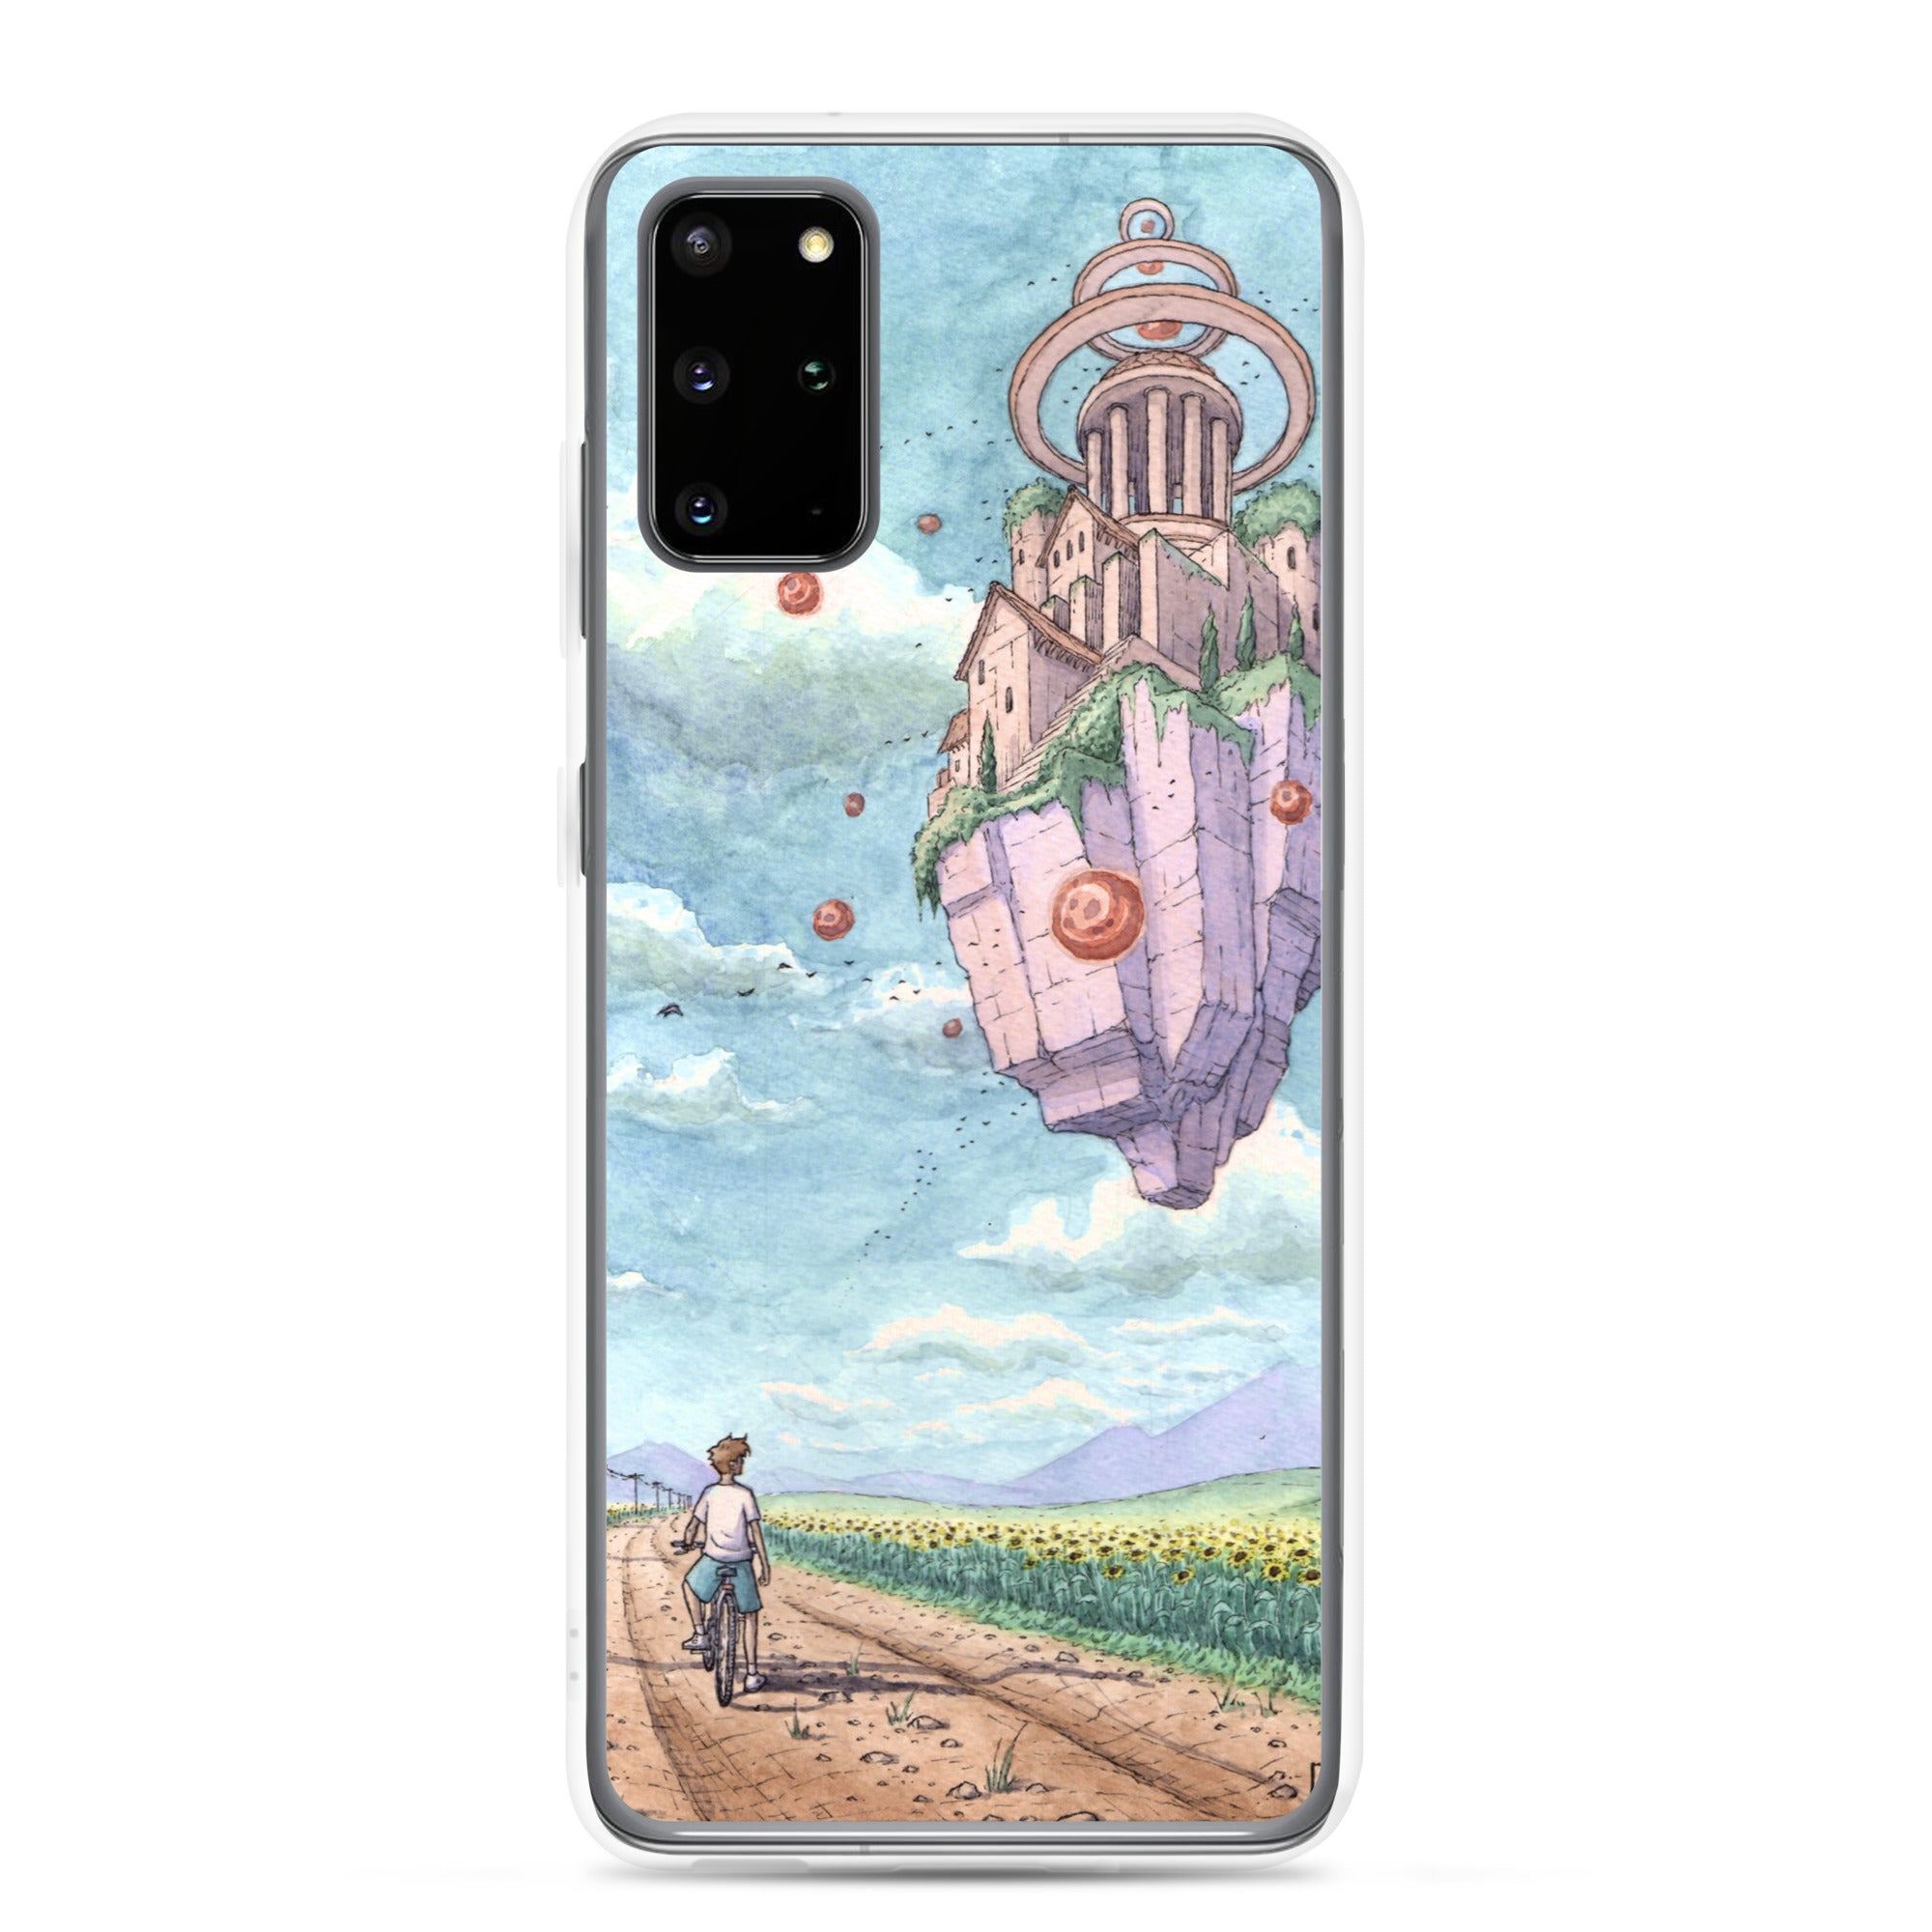 Clear Samsung Case - The Temple